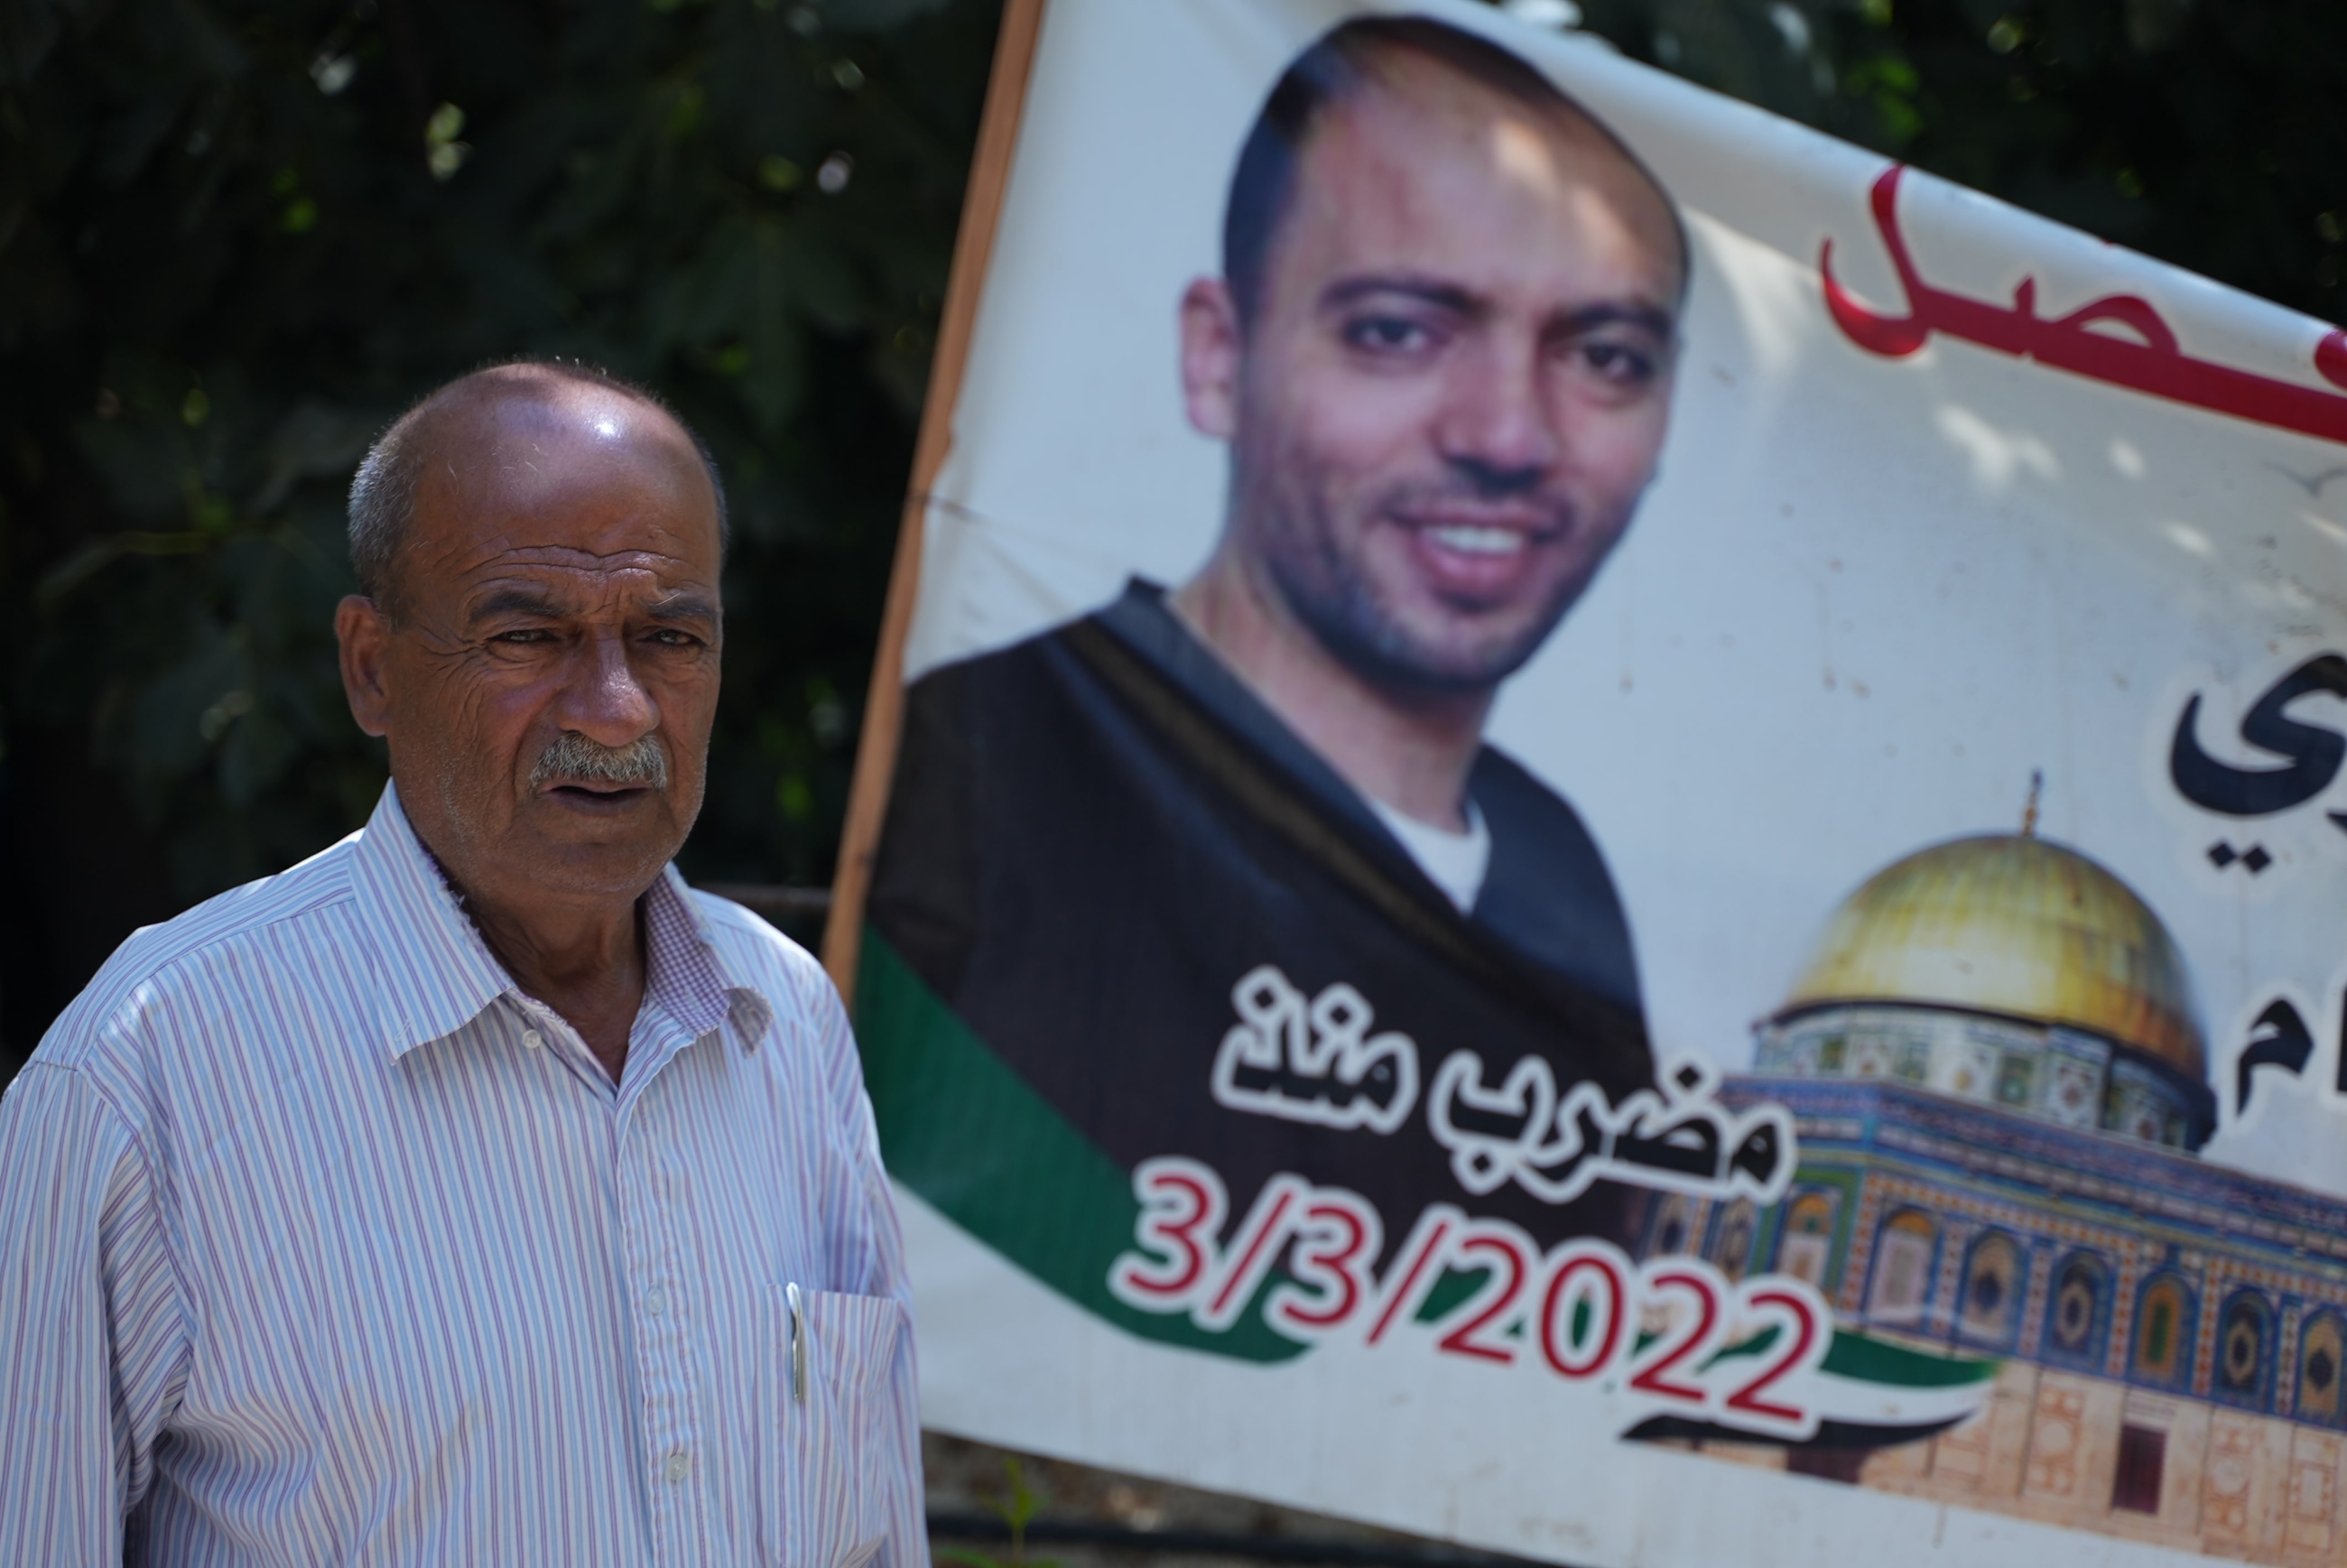 Mohammed Awawdeh poses for a picture in his home in Hebron, with a poster of his detained son Khalil Awawdeh, who is on his 173rd day of hunger strike in an Israeli prison (MEE)